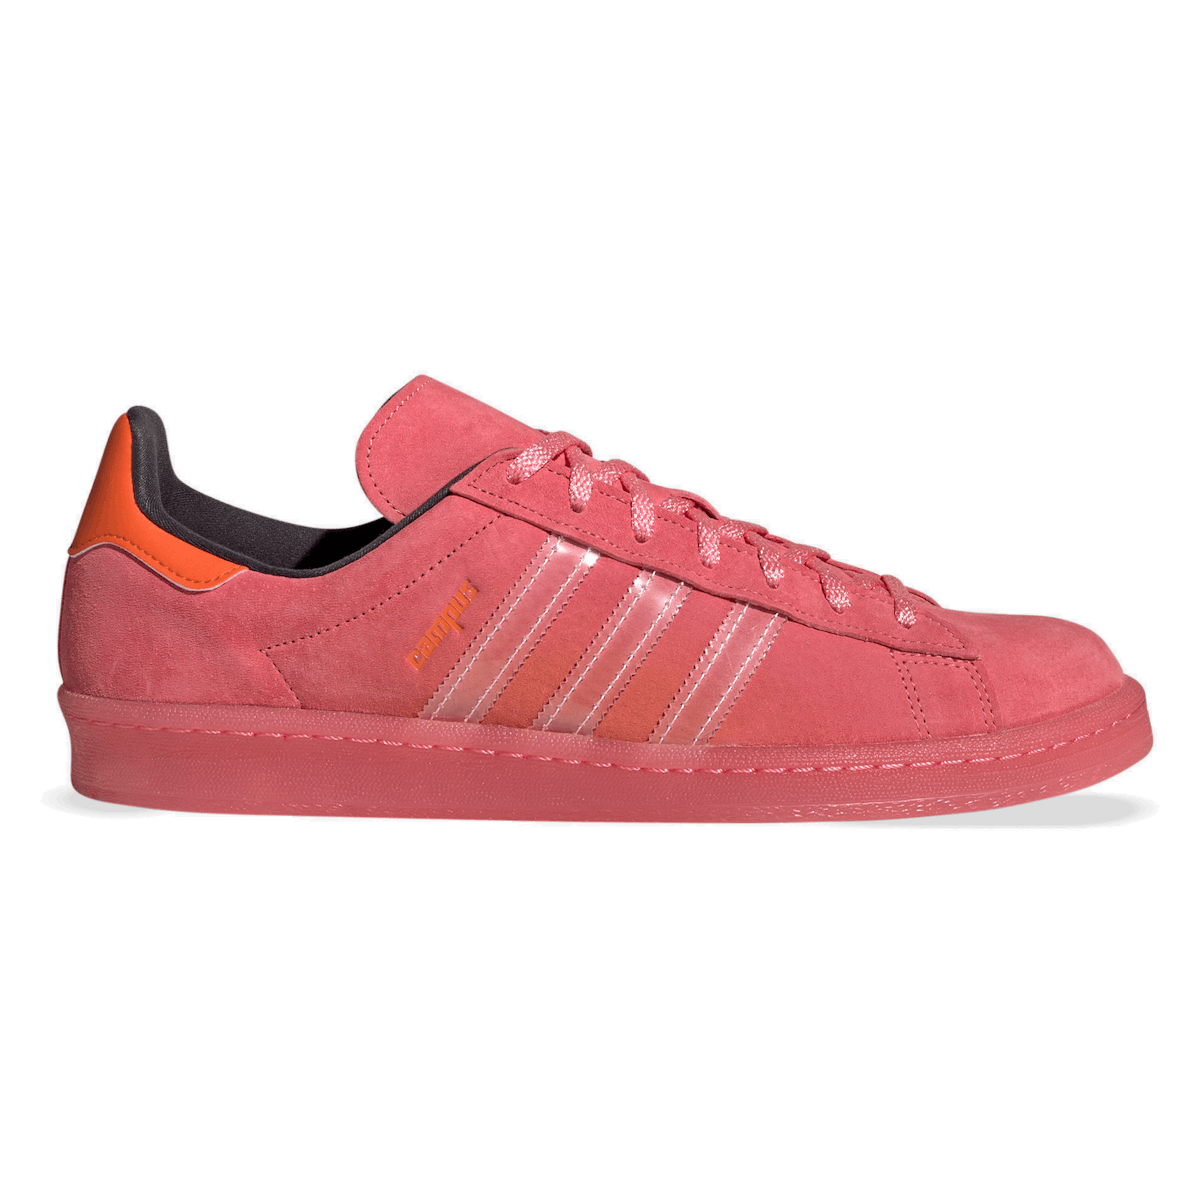 Adidas Campus 80s "New York Coral"